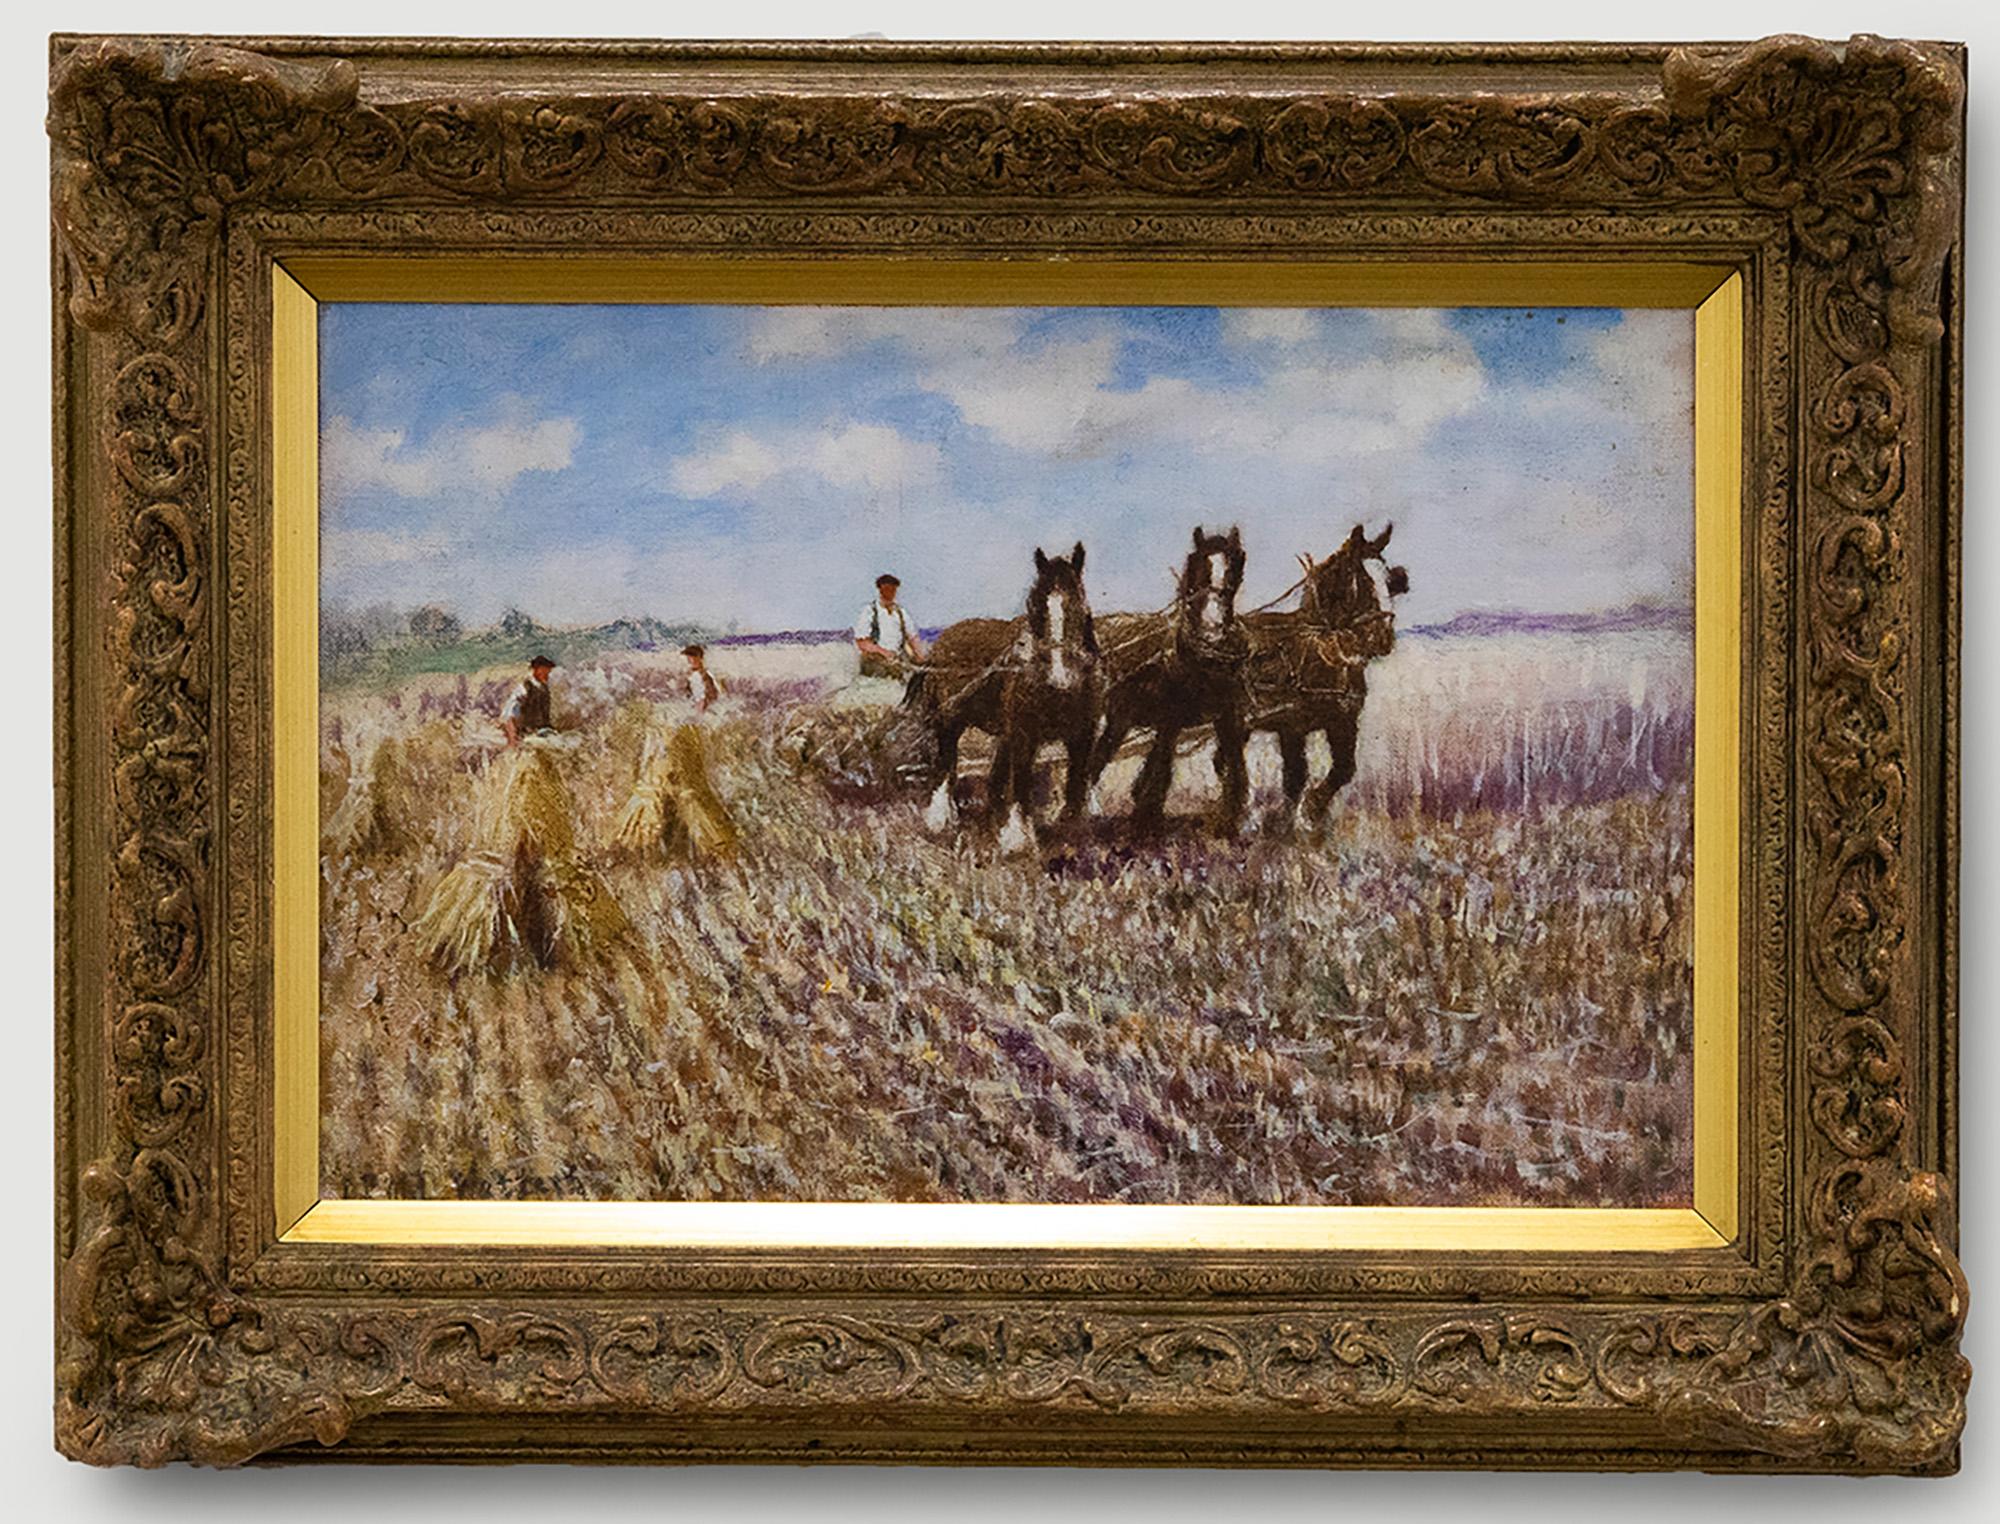 A charming country scene depicting farmers and plough horses making hay at harvest time. Signed to the lower right. Presented in an ornate gilt frame with foliate corner mouldings. On board.